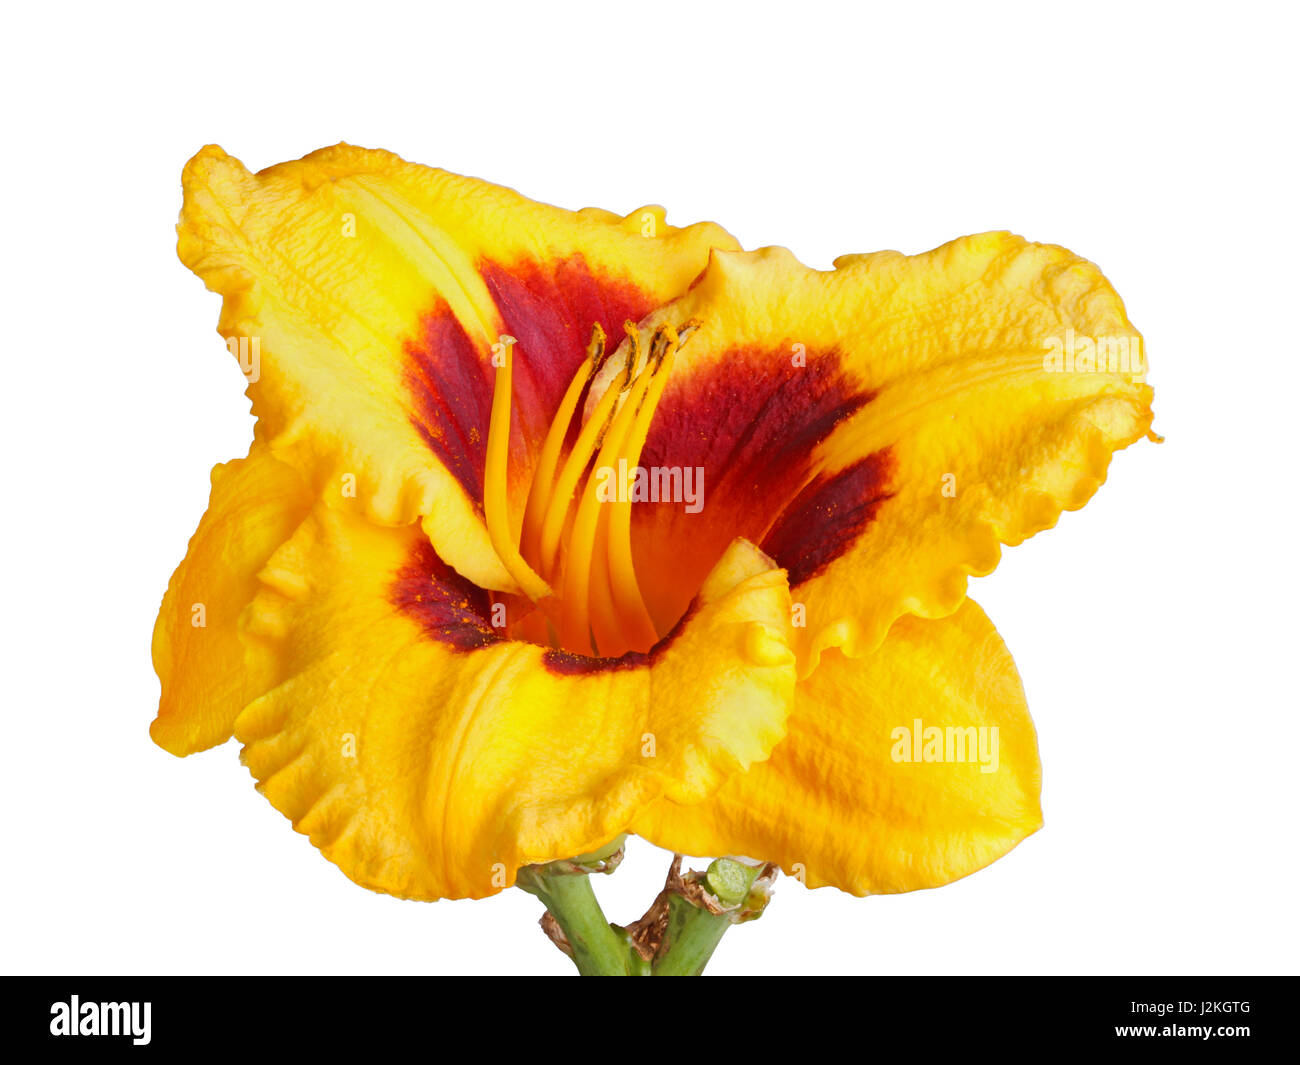 Close-up of a single stem with a red and yellow flower of a daylily (Hemerocallis hybrid) isolated against a white background Stock Photo